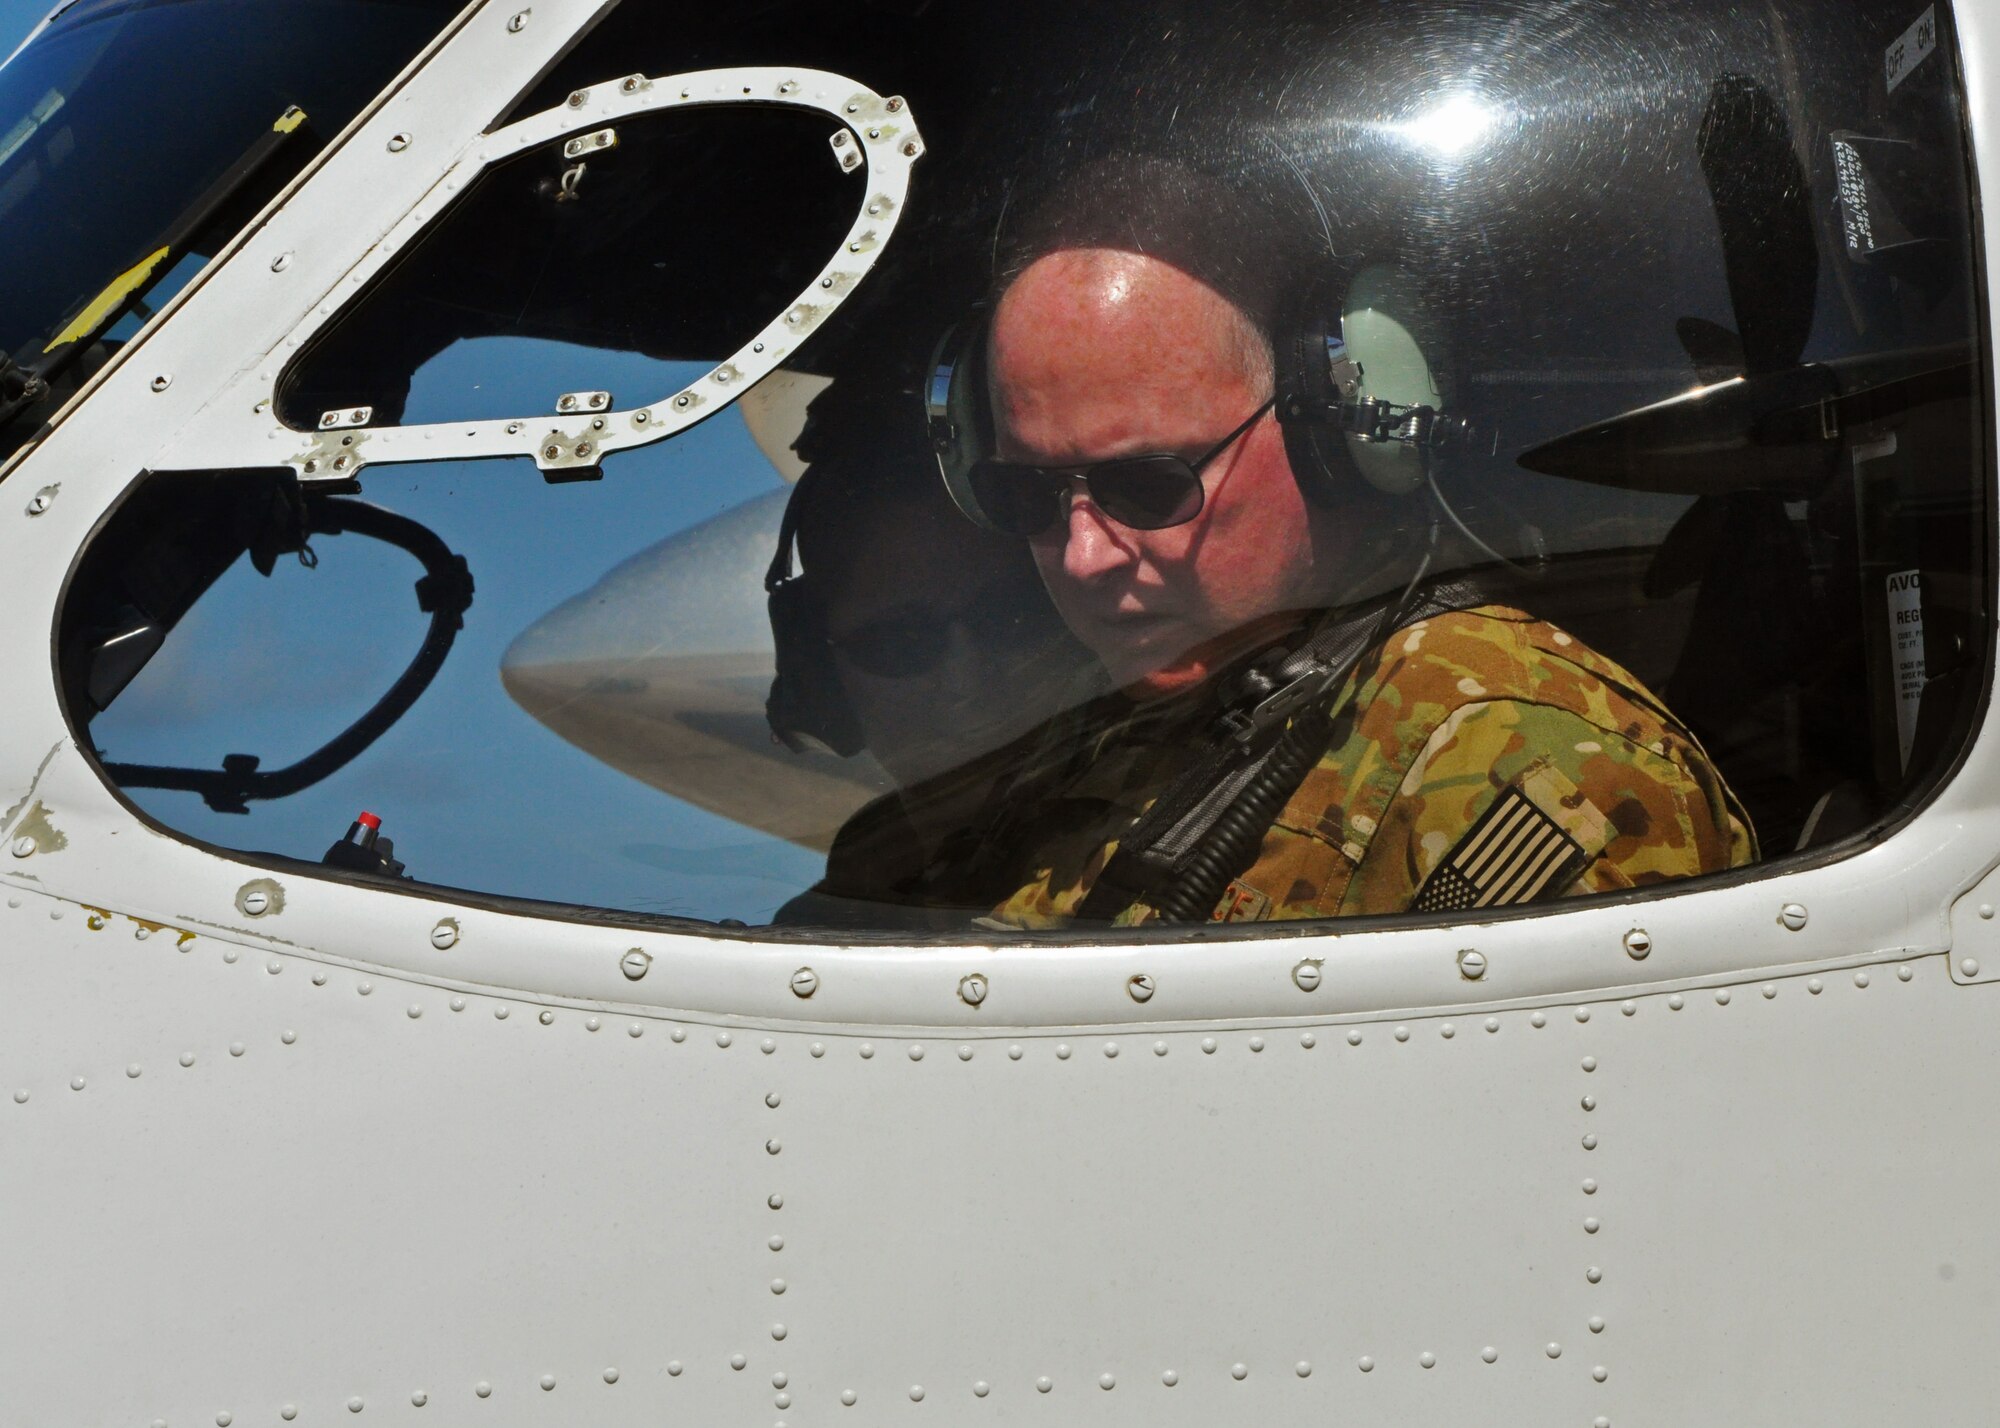 Maj. Gen. Eugene Haase, Air Force Special Operations Command vice commander, prepares to taxi his C-145A Skytruck on the Duke Field, Fla., flightline July 28, 2016.  Haase spent the day getting a close-up look at how Duke's Reserve and active-duty Airmen work seamlessly under the Total Force Integration concept to perform their shared AFSOC mission sets. (U.S. Air Force photo/Dan Neely)